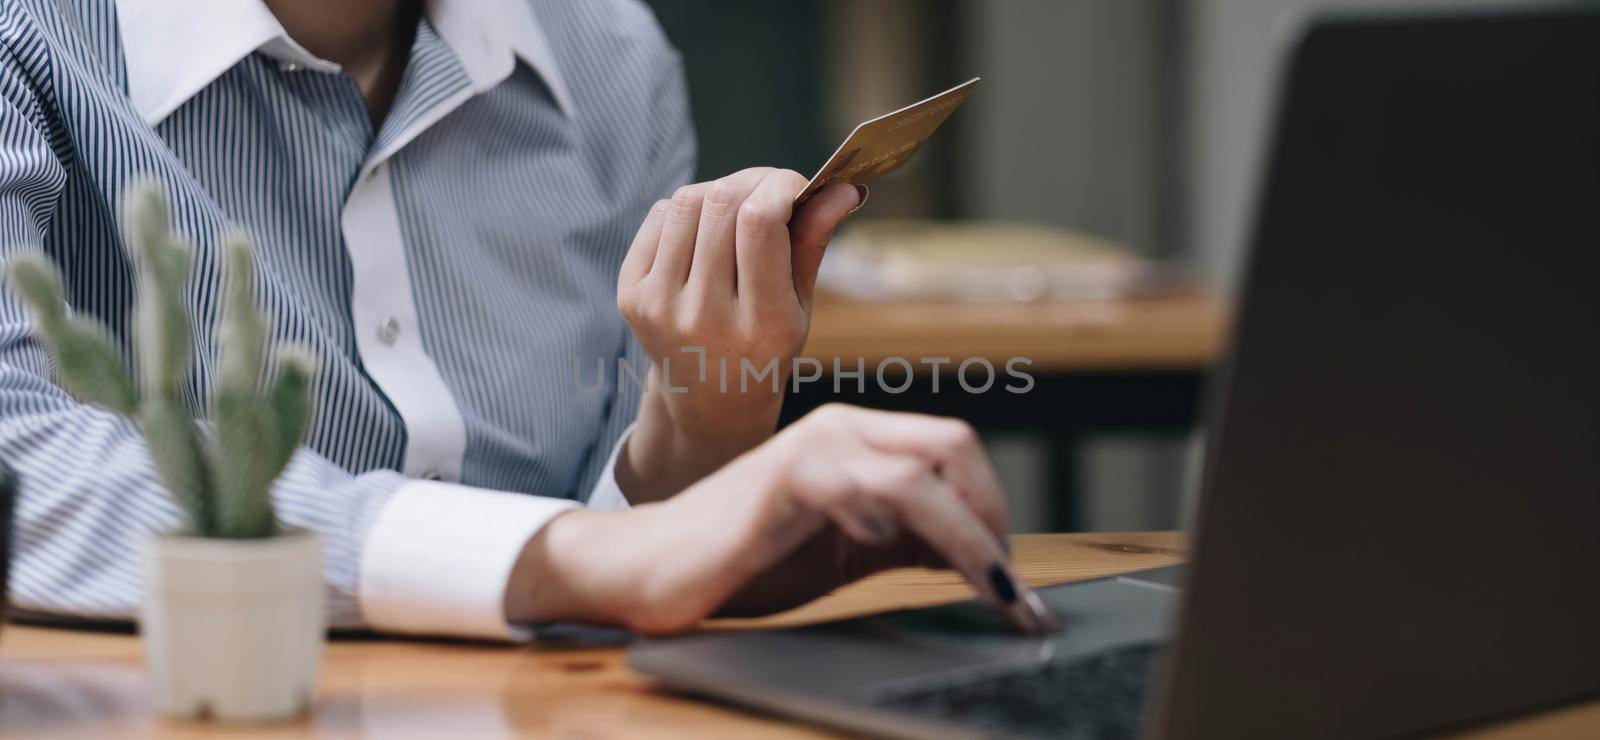 Hands holding credit card, typing on the keyboard of laptop, onine shopping detail close up.